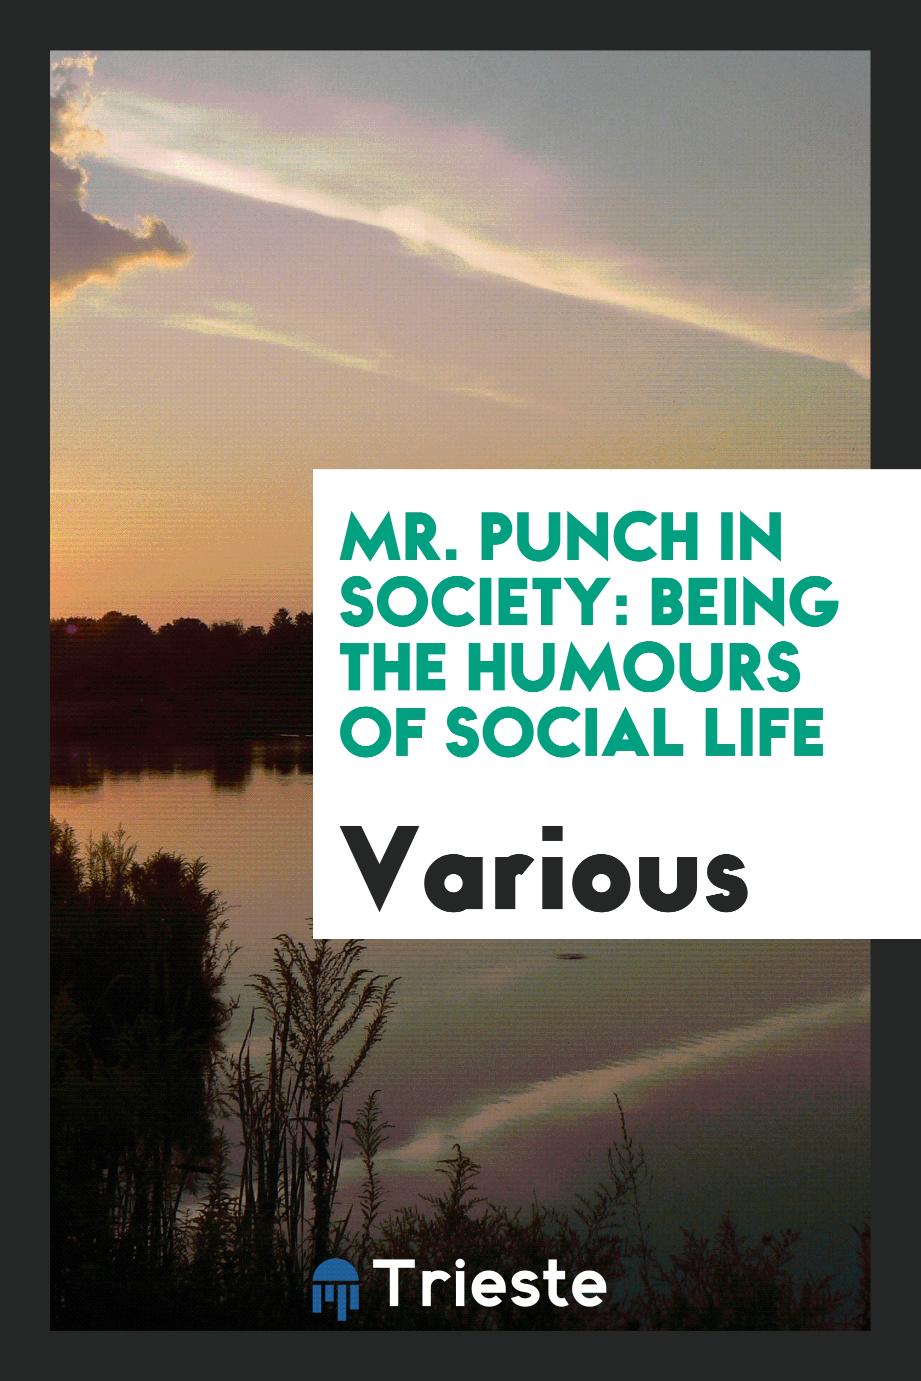 Mr. Punch in society: being the humours of social life